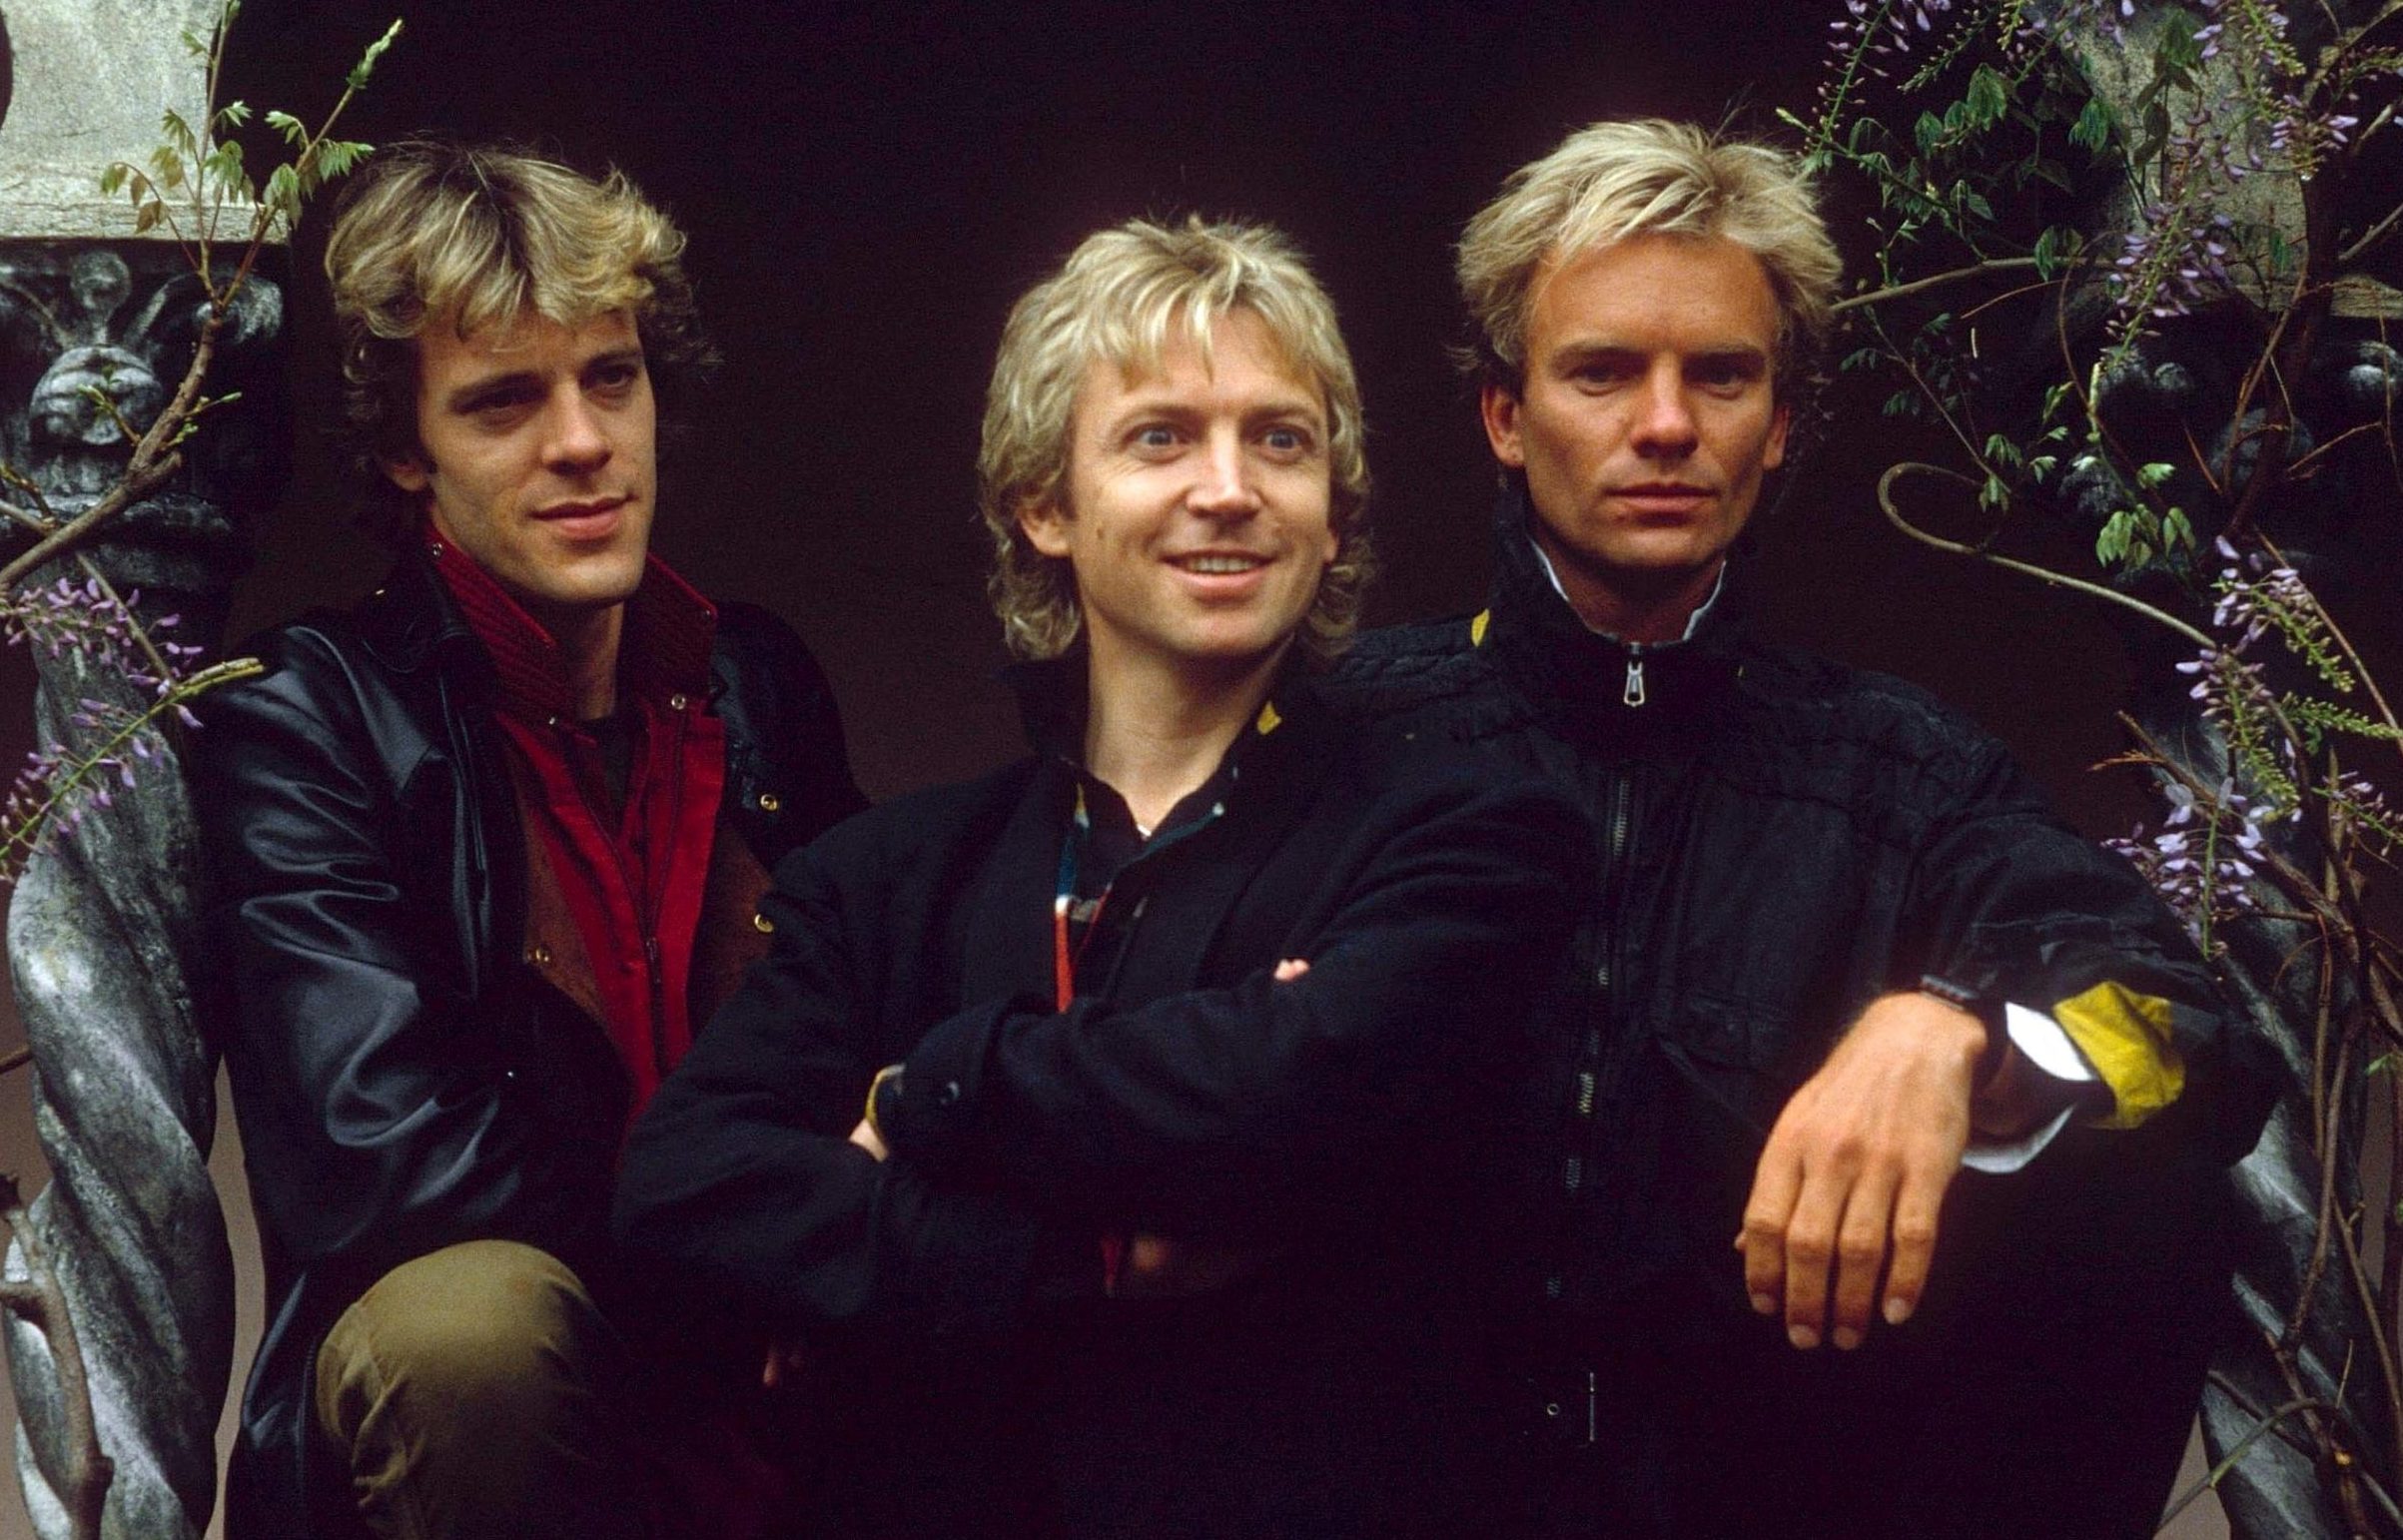 The Police: Stewart, Andy Summers and Sting in 1983